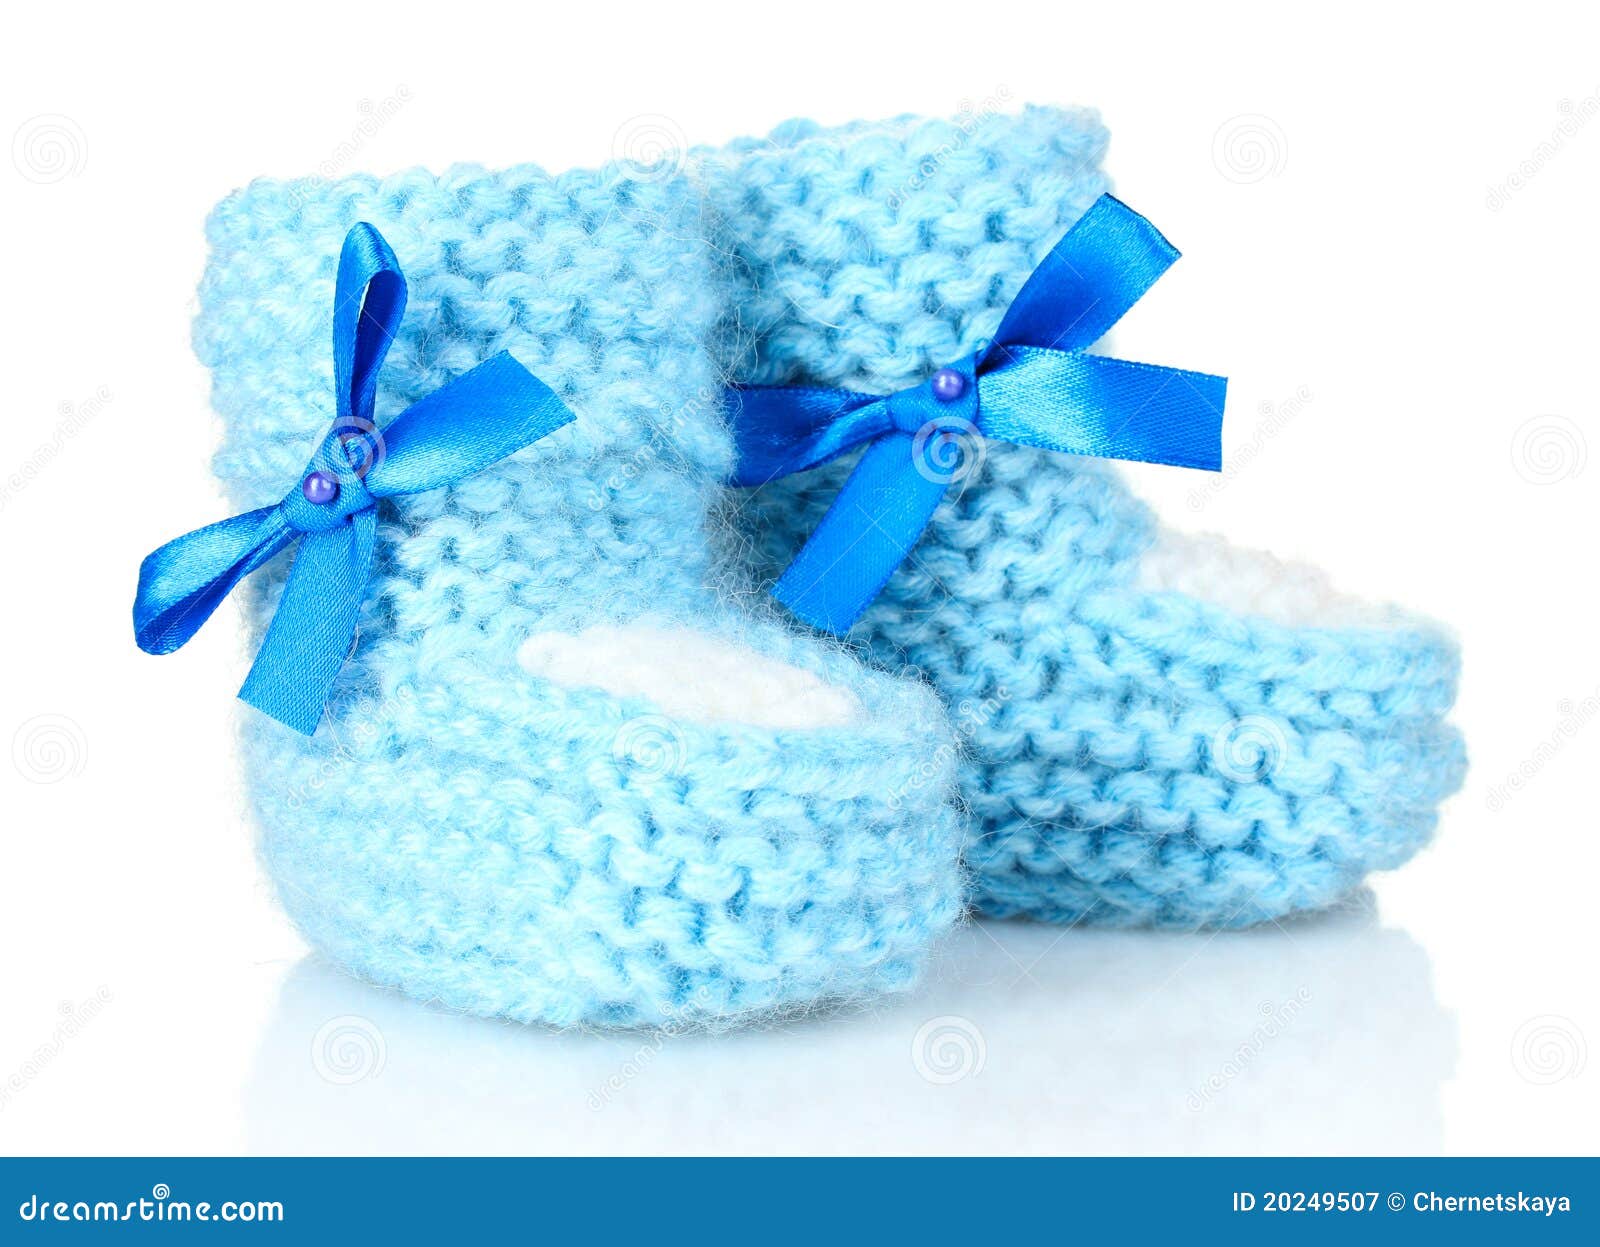 Blue baby booties stock image. Image of cute, shoe, small - 20249507